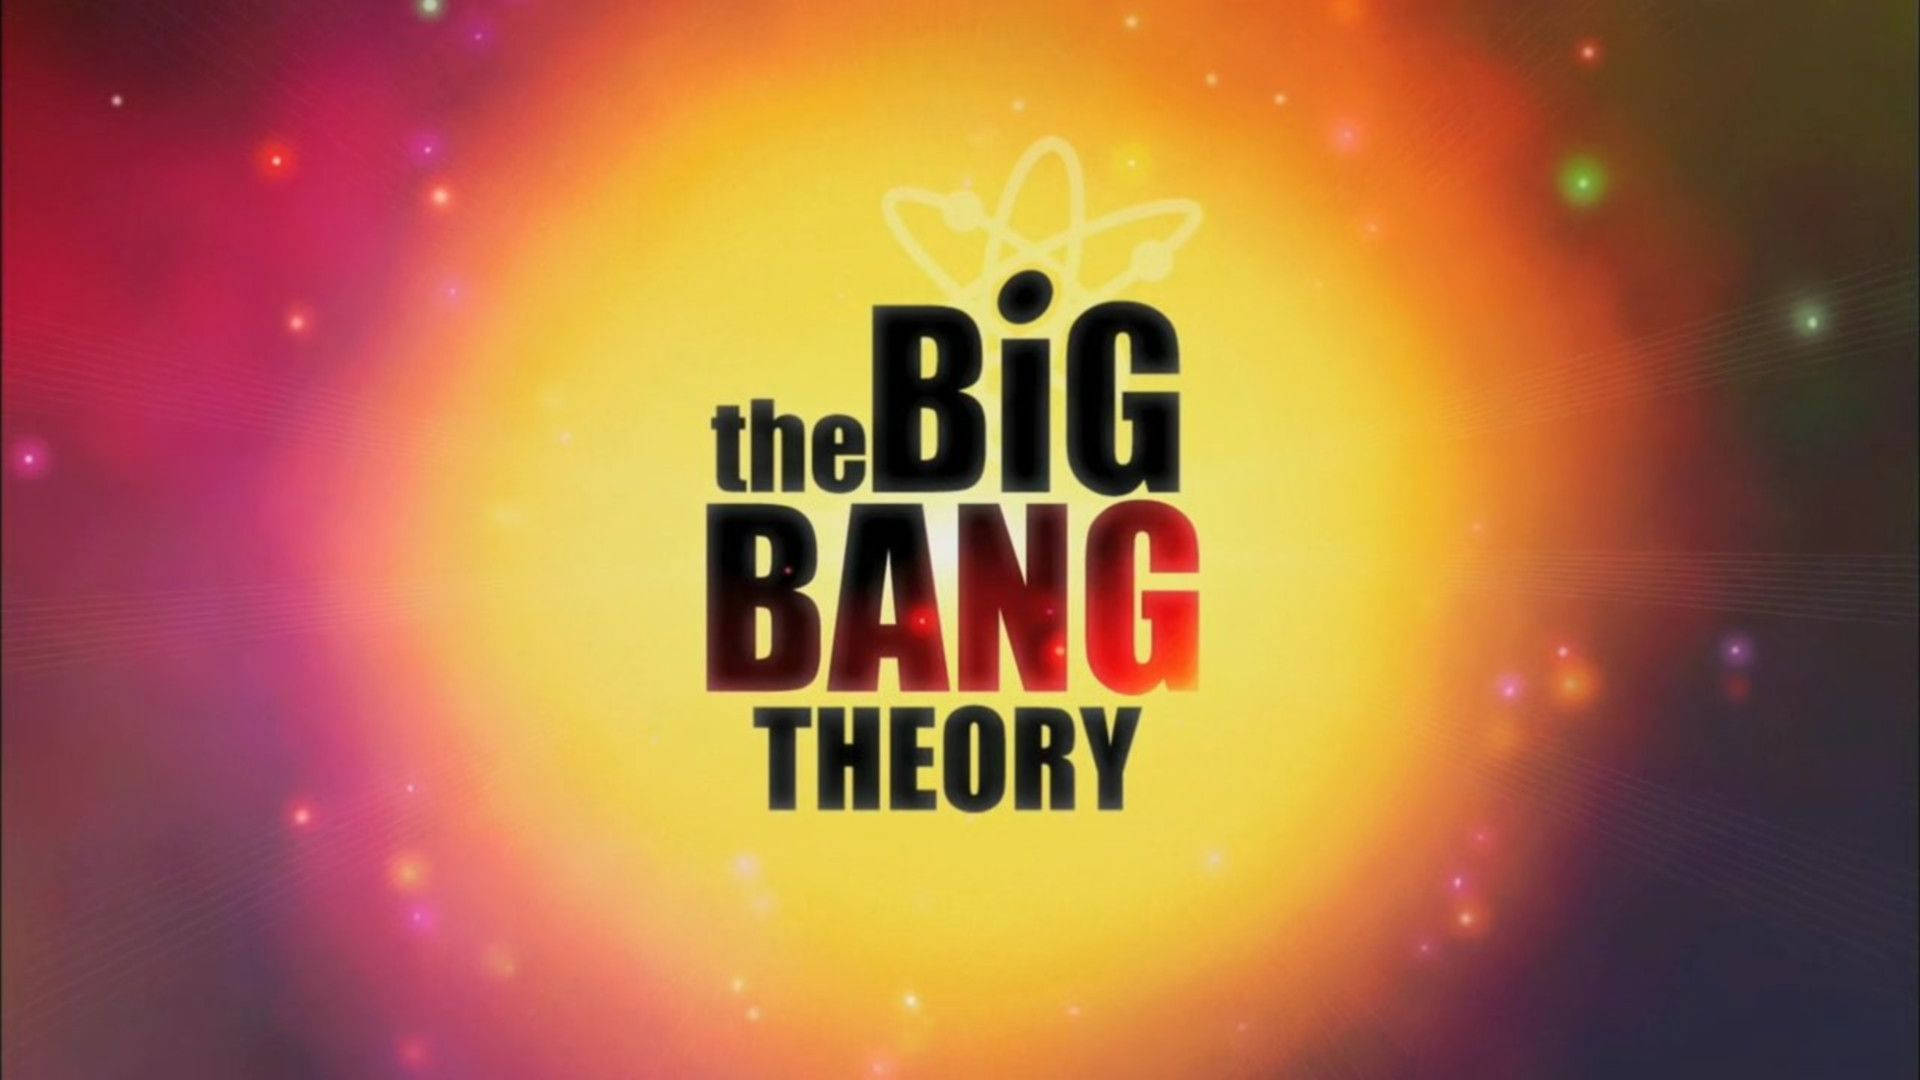 The Big Bang Theory Stylized Poster Background